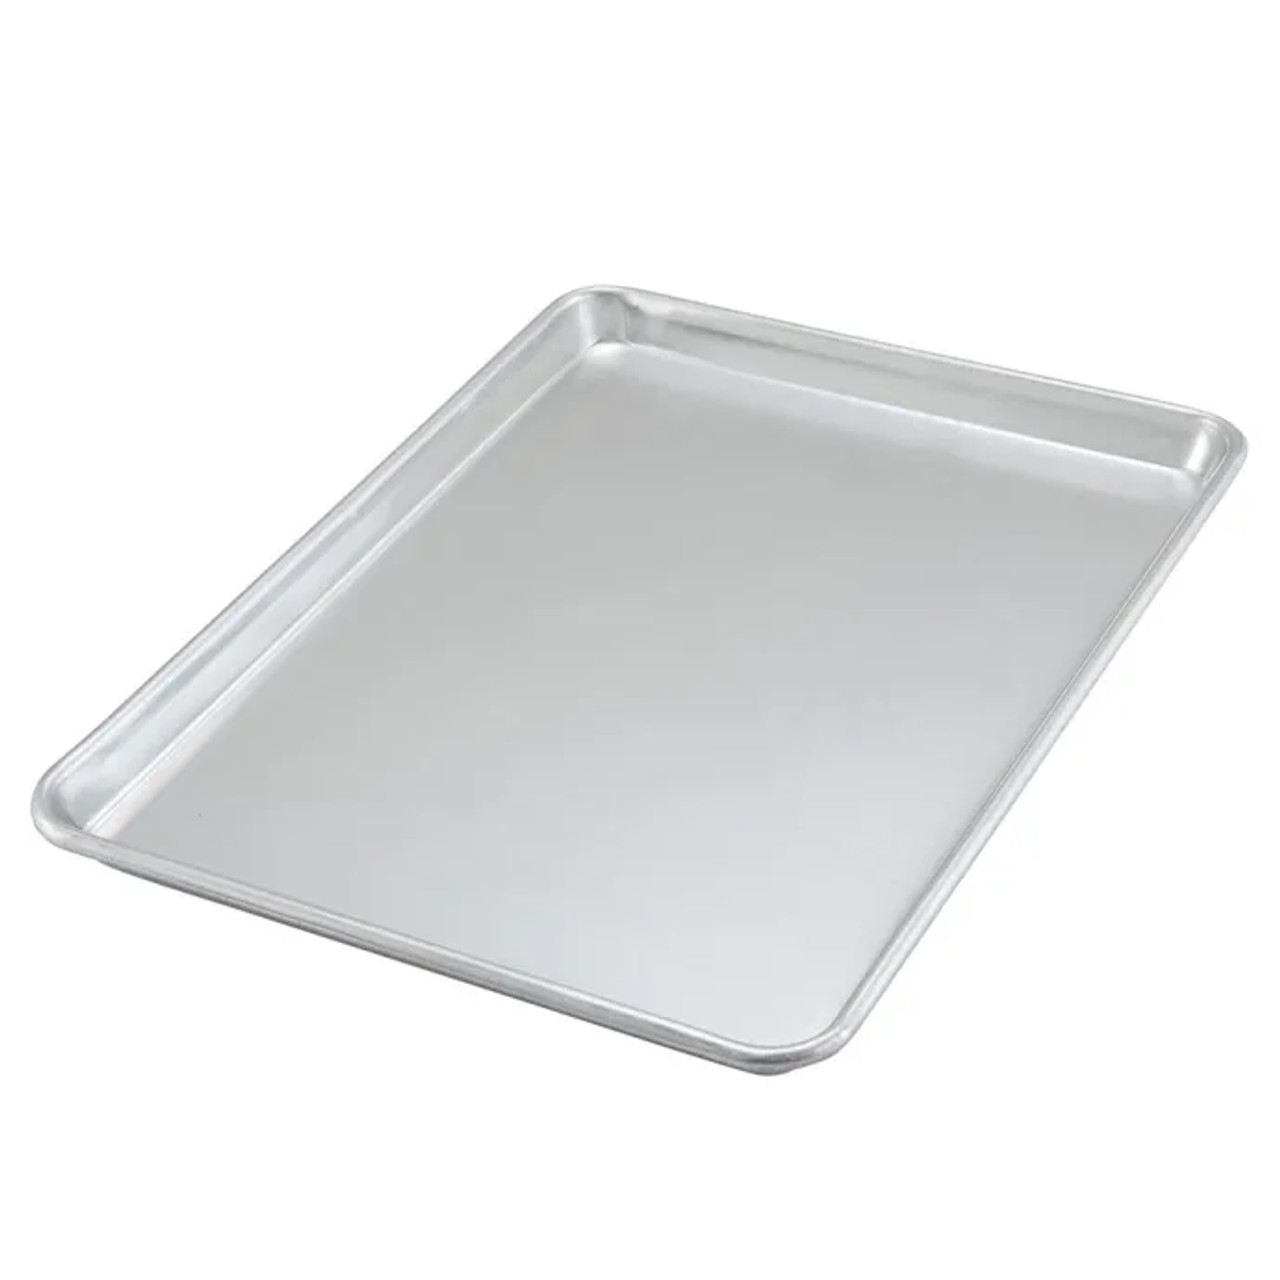 Winco PGW-1420 - Chrome-Plated Wire Pan Grate 14 x 20